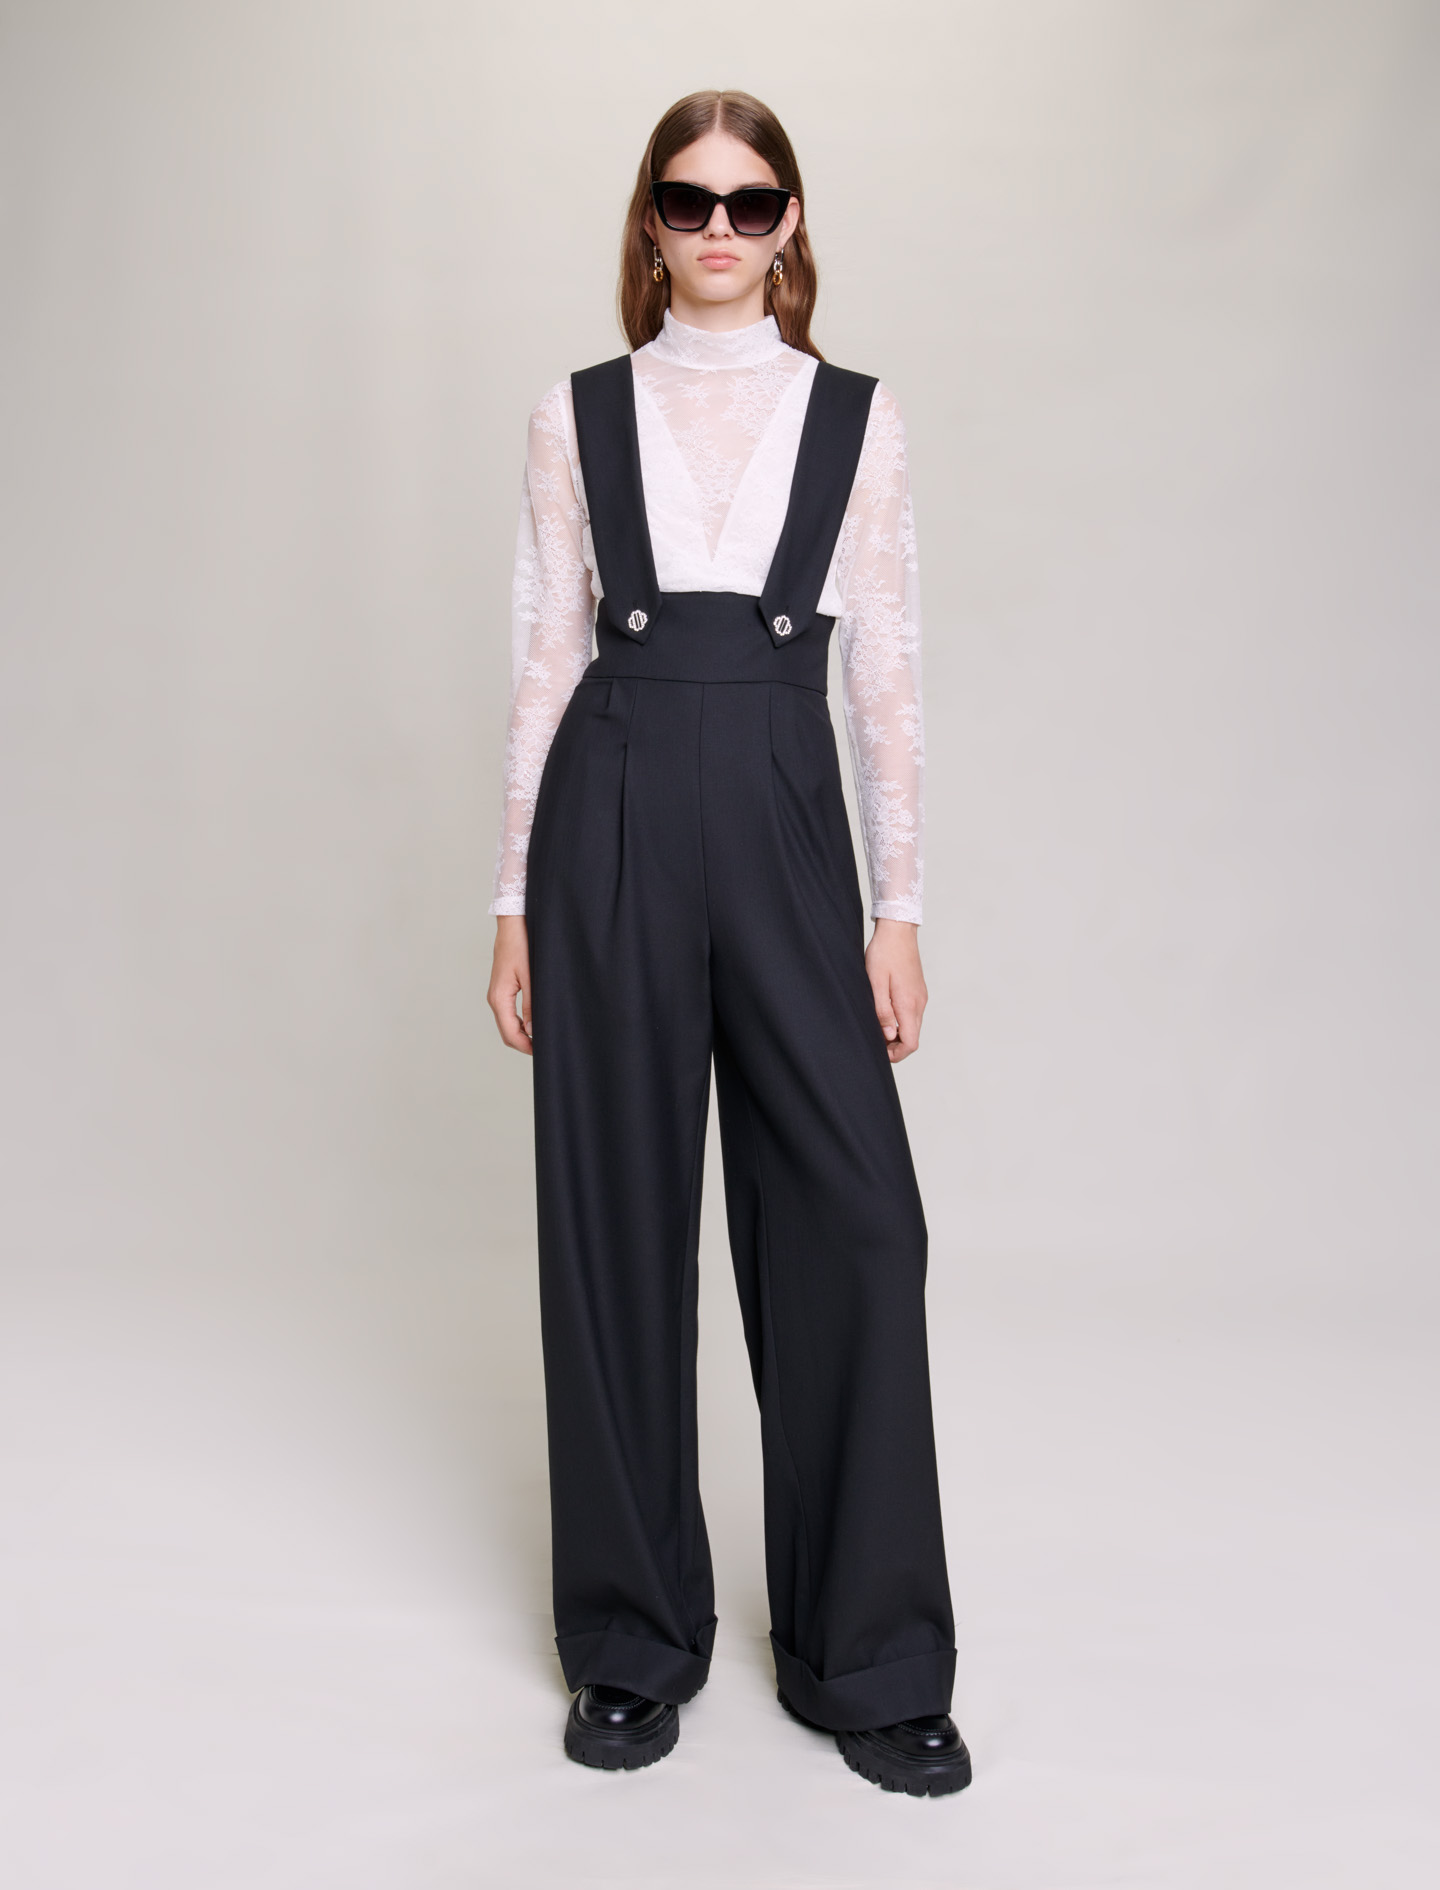 Maje Woman's polyester, Wide-leg trousers with braces for Fall/Winter, in color Black / Black